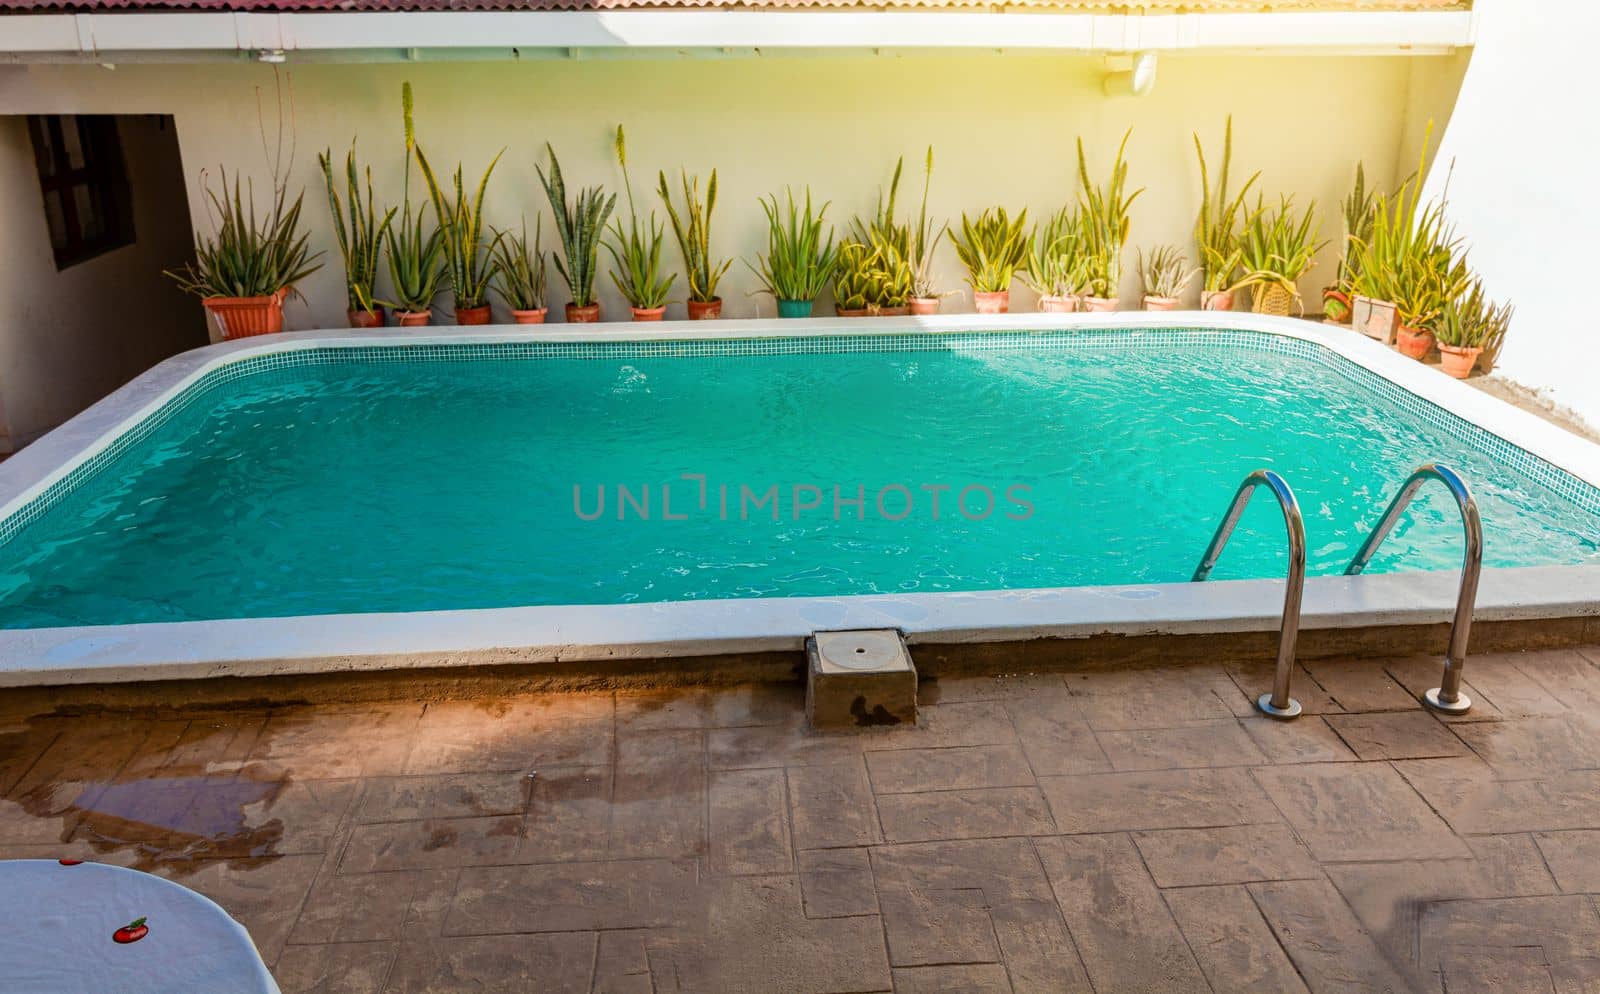 Crystal clear home swimming pool on a sunny day, Concept of home swimming pool designs. Beautiful home swimming pool with crystal clear waters by isaiphoto